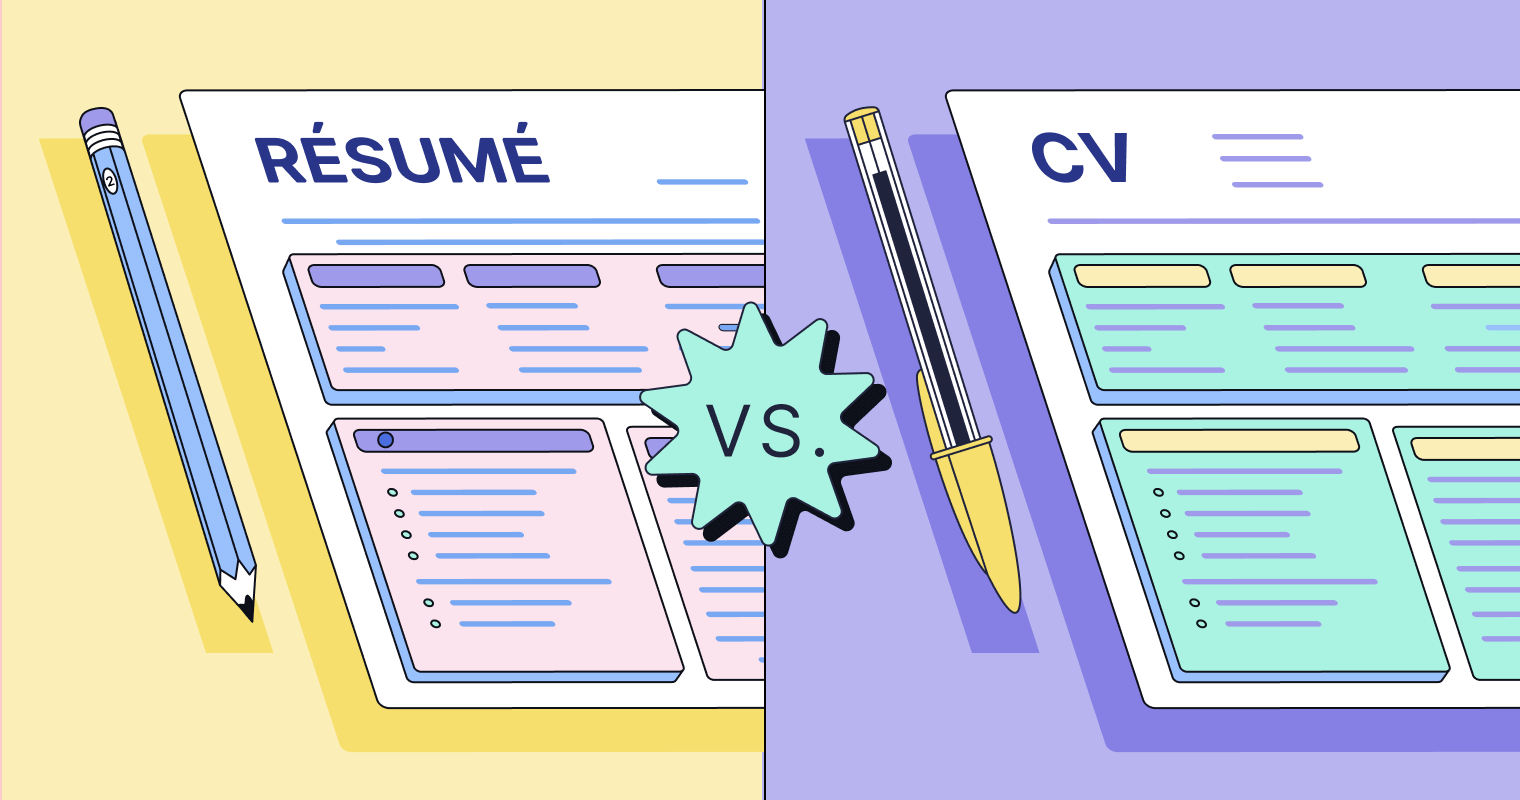 CV or Resume? See the 5 Major Differences